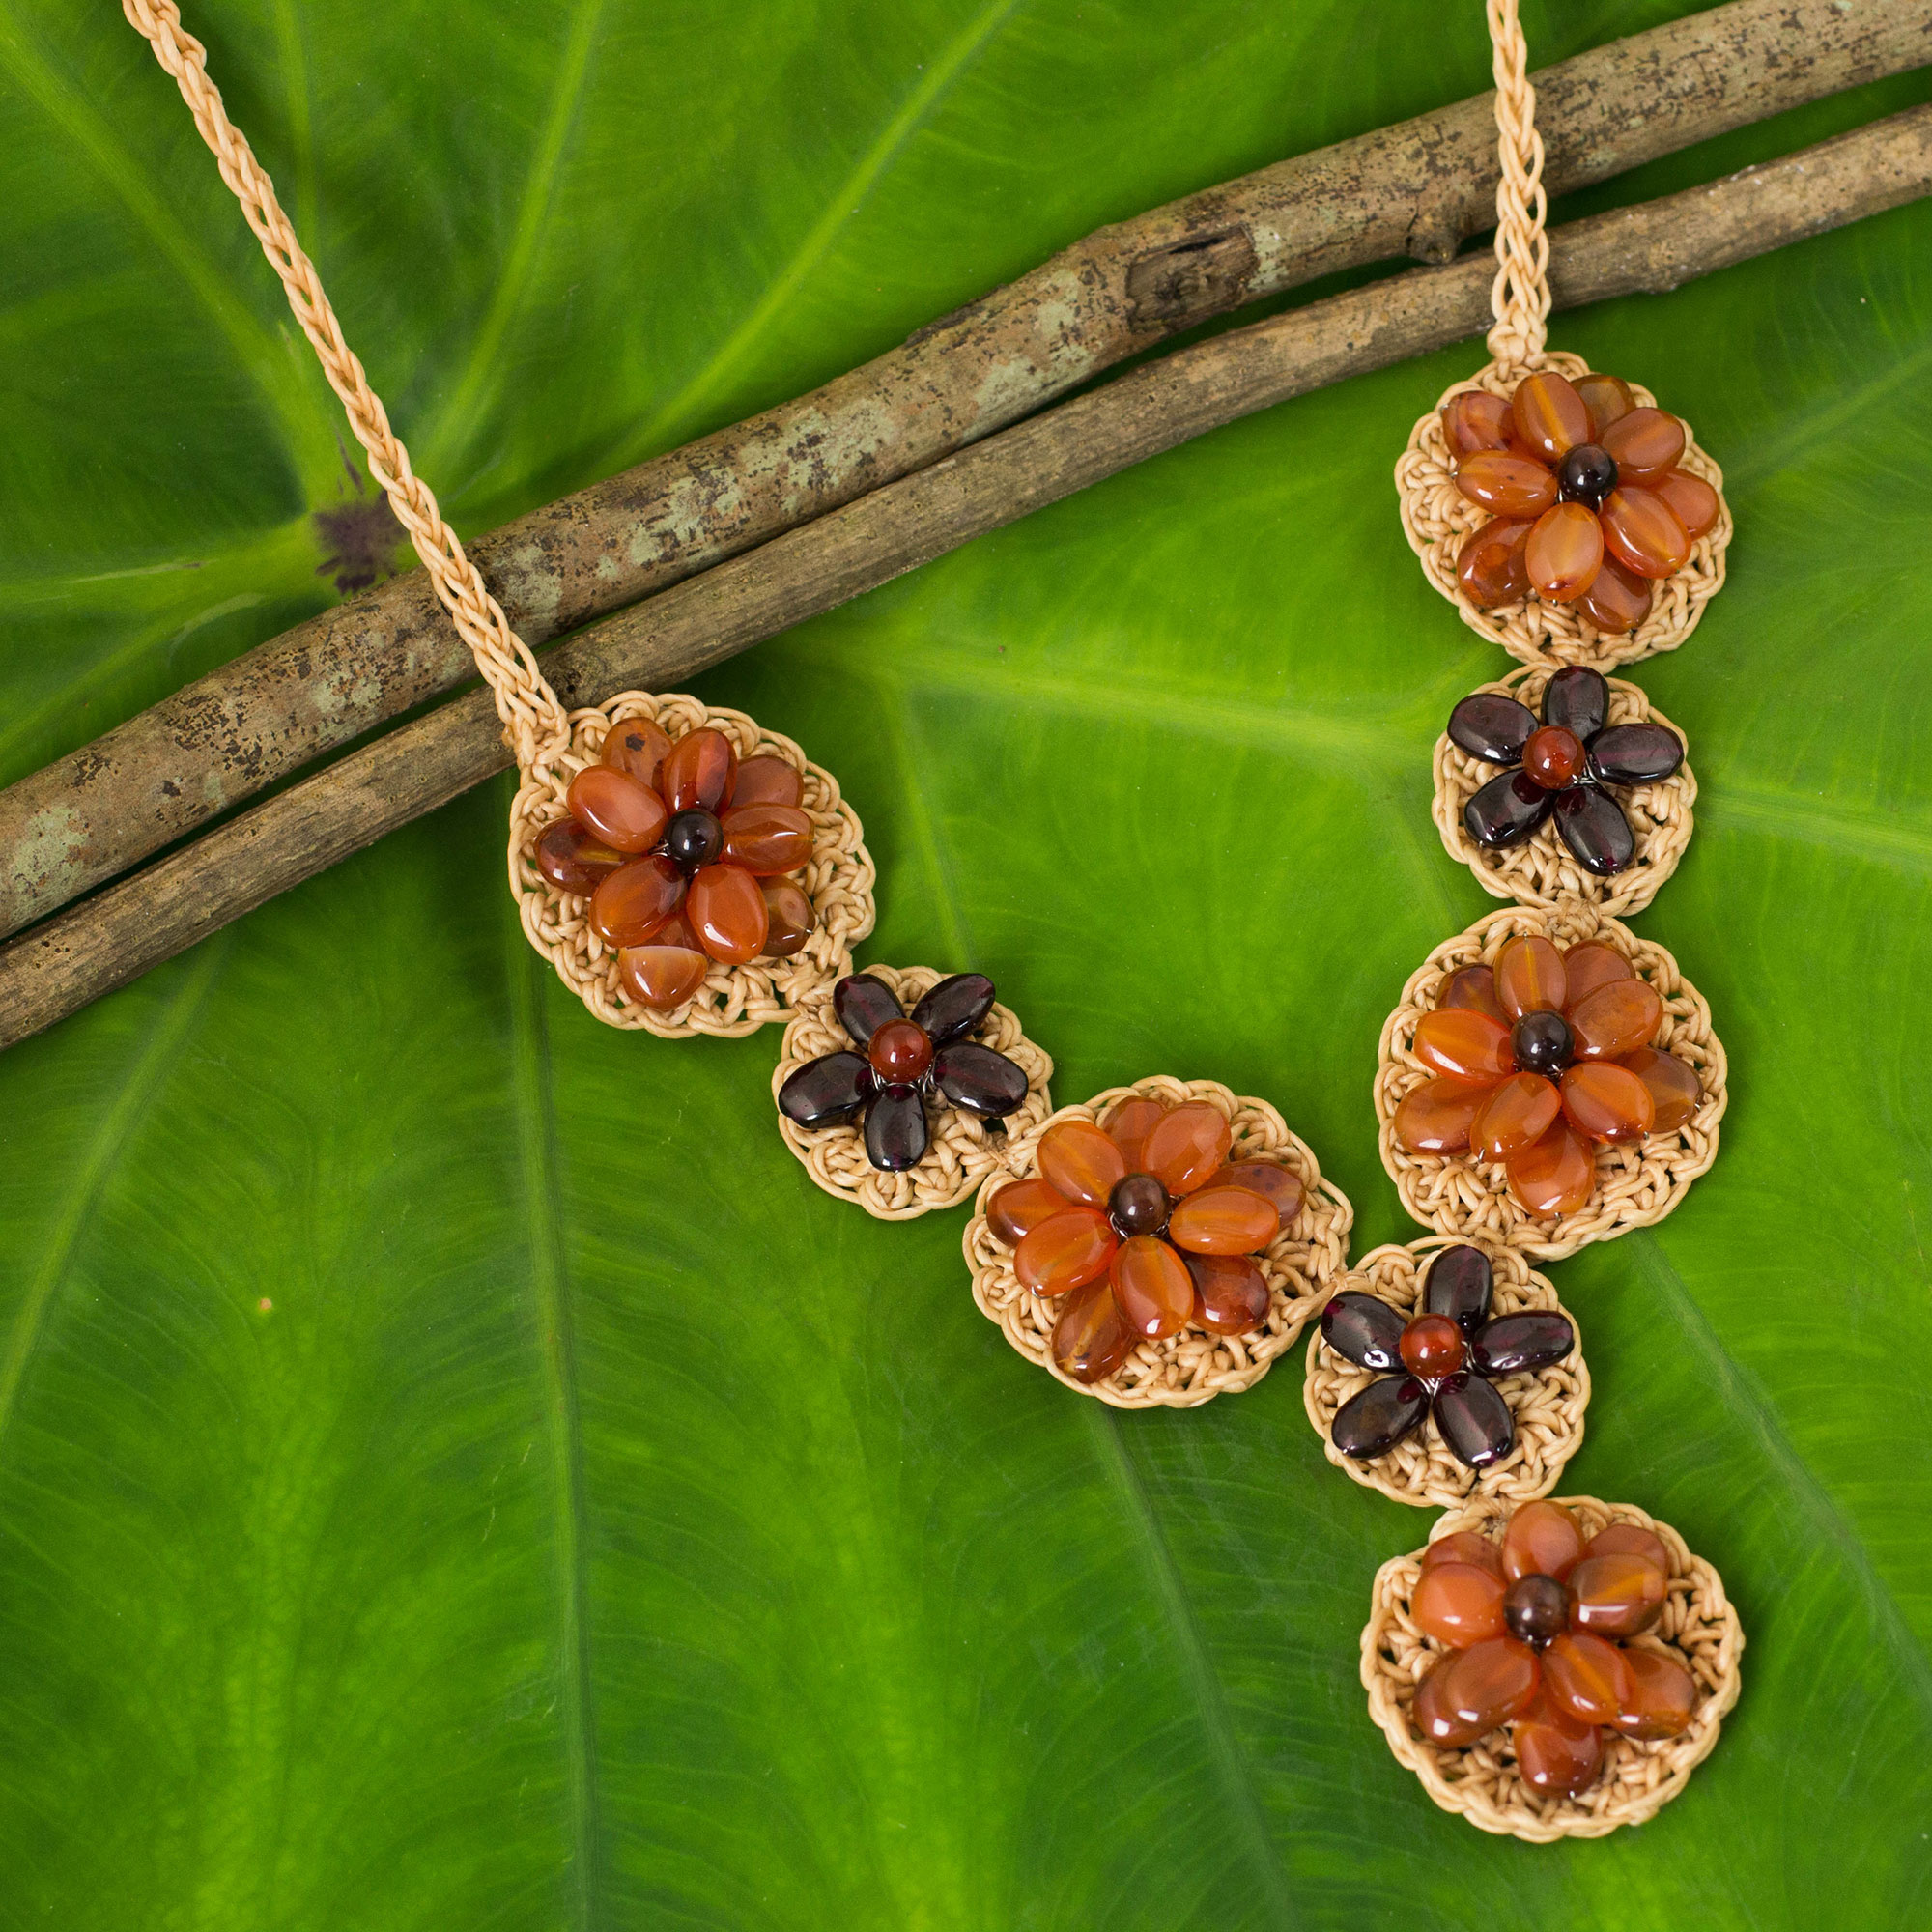 Beaded Carnelian and Garnet Floral Pendant Necklace, 'Floral Garland in Orange' Gemstone to Complement Skin Tone